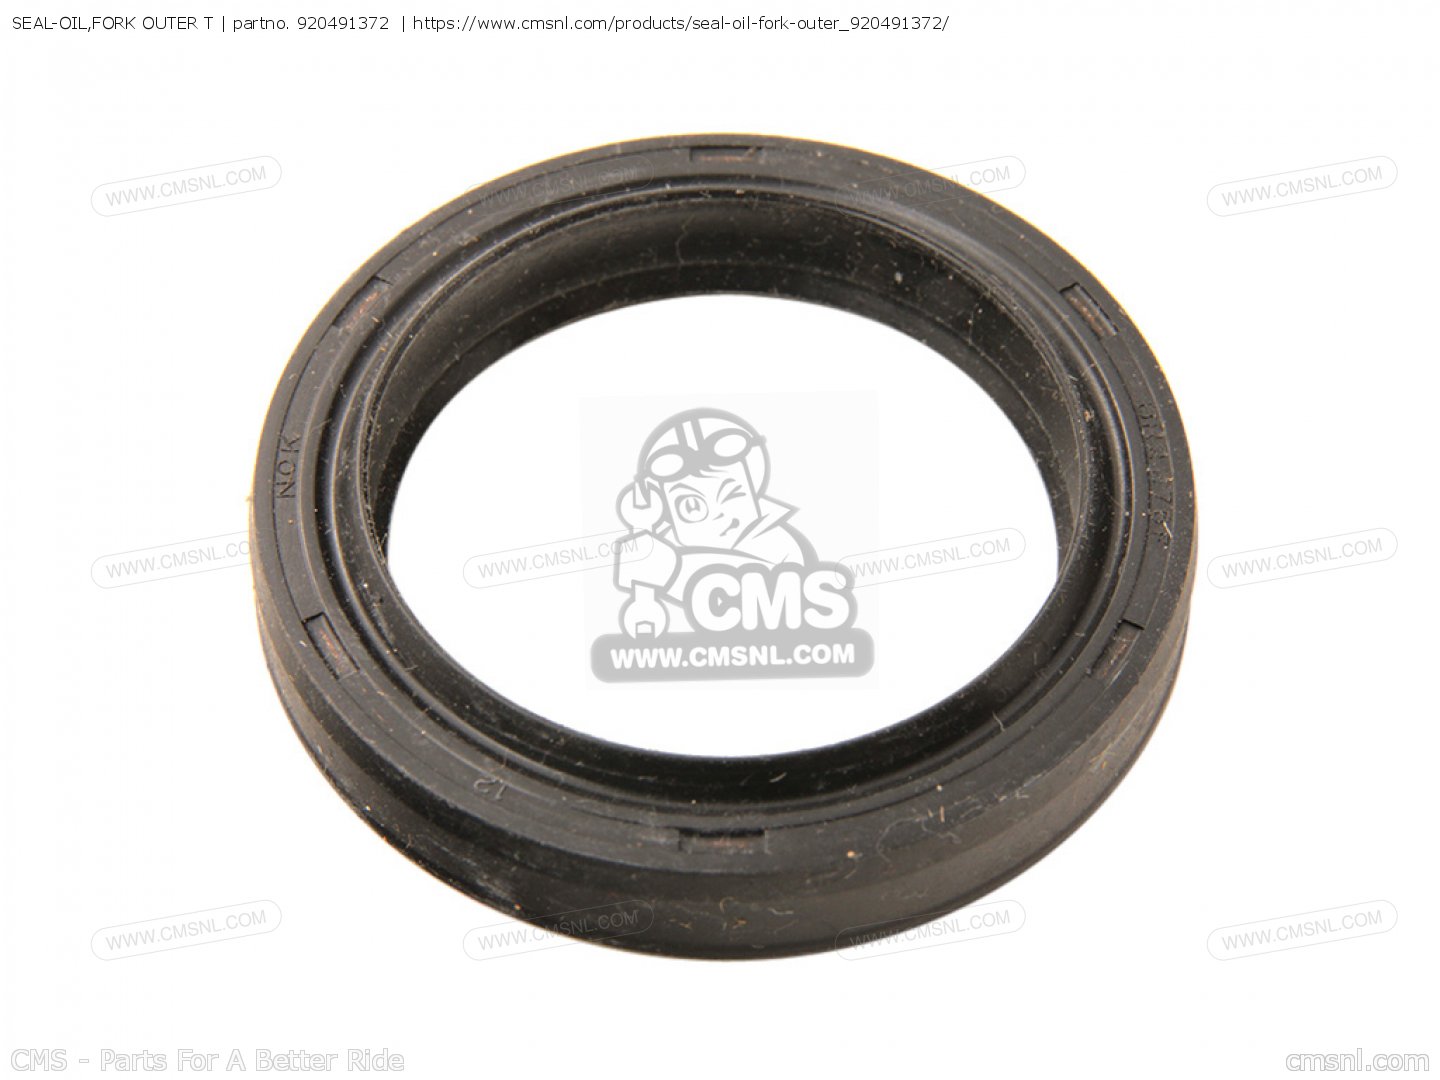 SEAL-OIL,FORK OUTER T for ZX750E2 TURBO 1985 USA CALIFORNIA CANADA - order at CMSNL